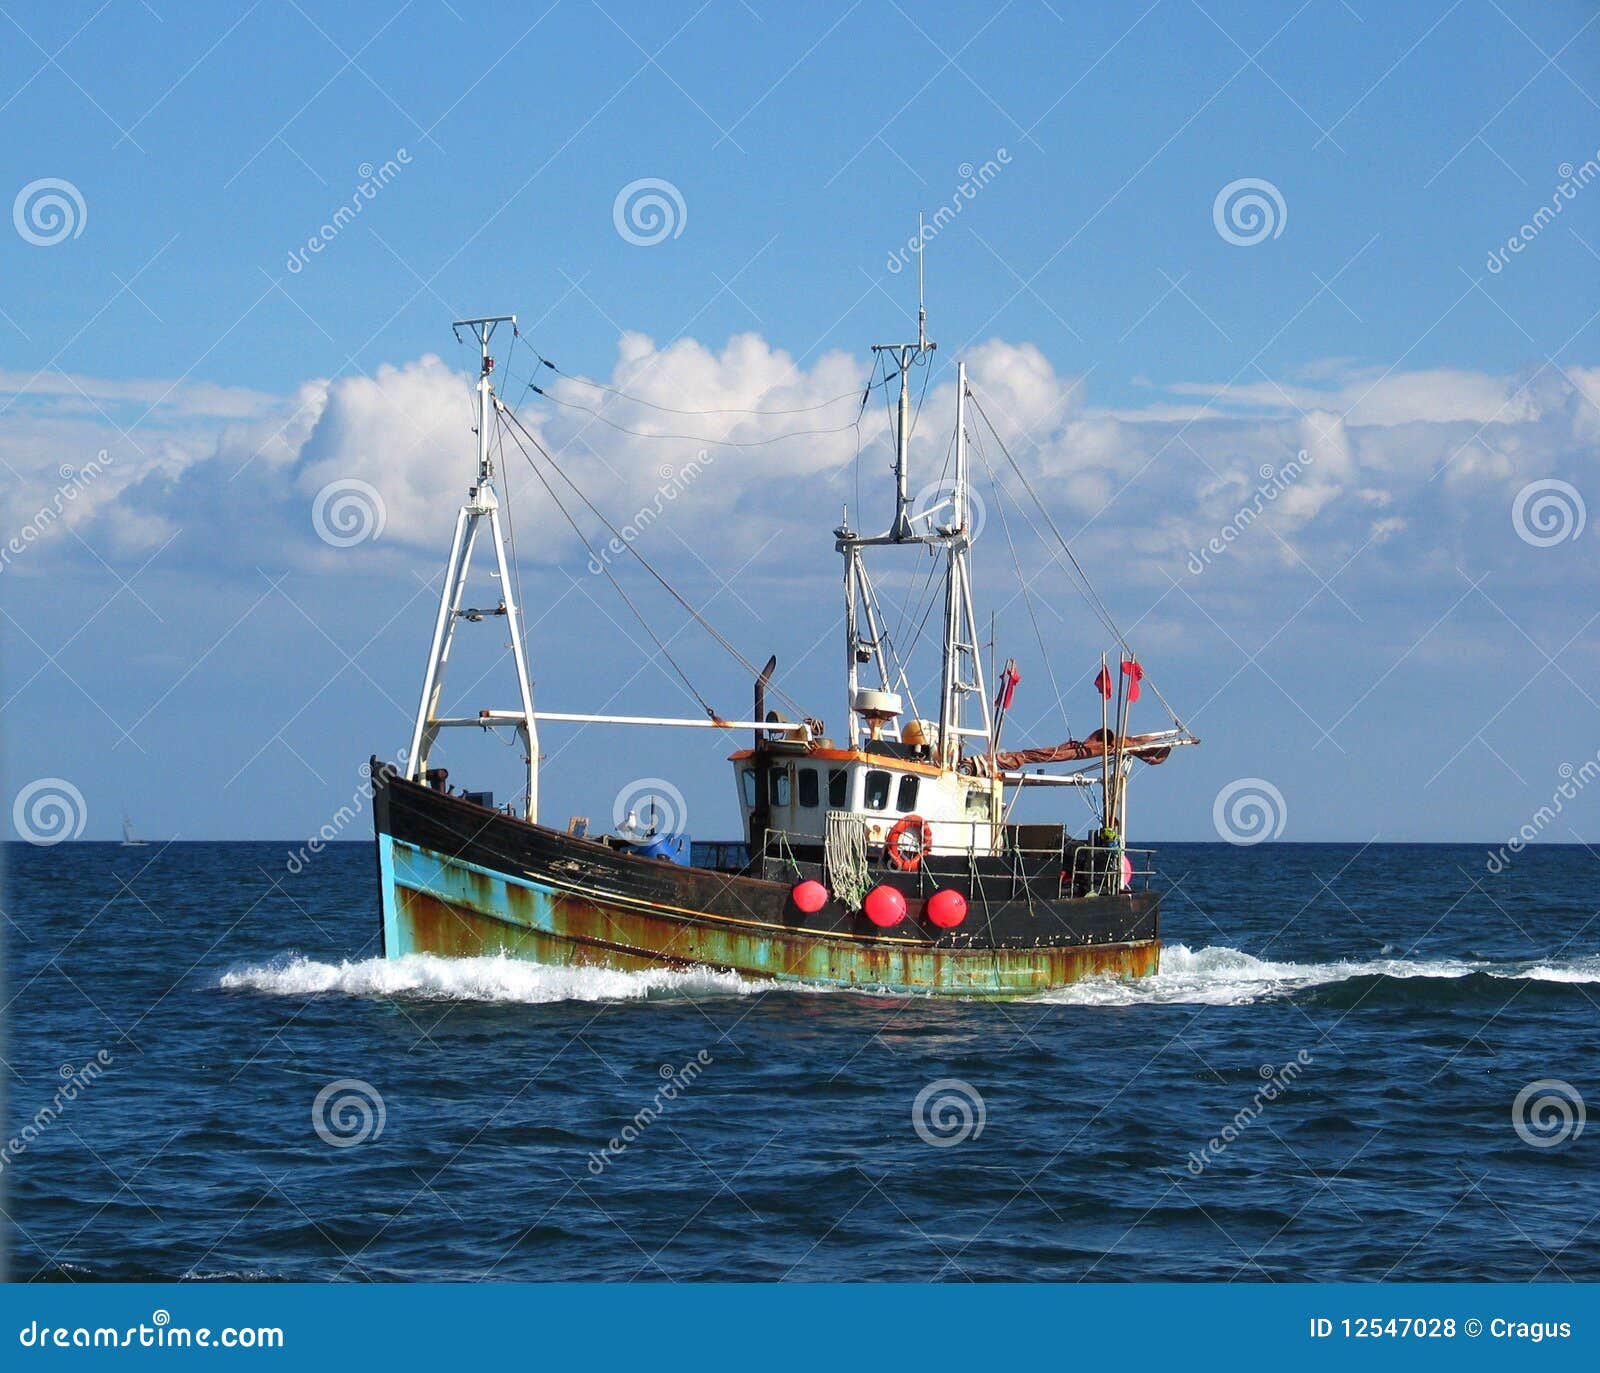 Classic style, colourful, rusty old fishing boat with a sea gull on 